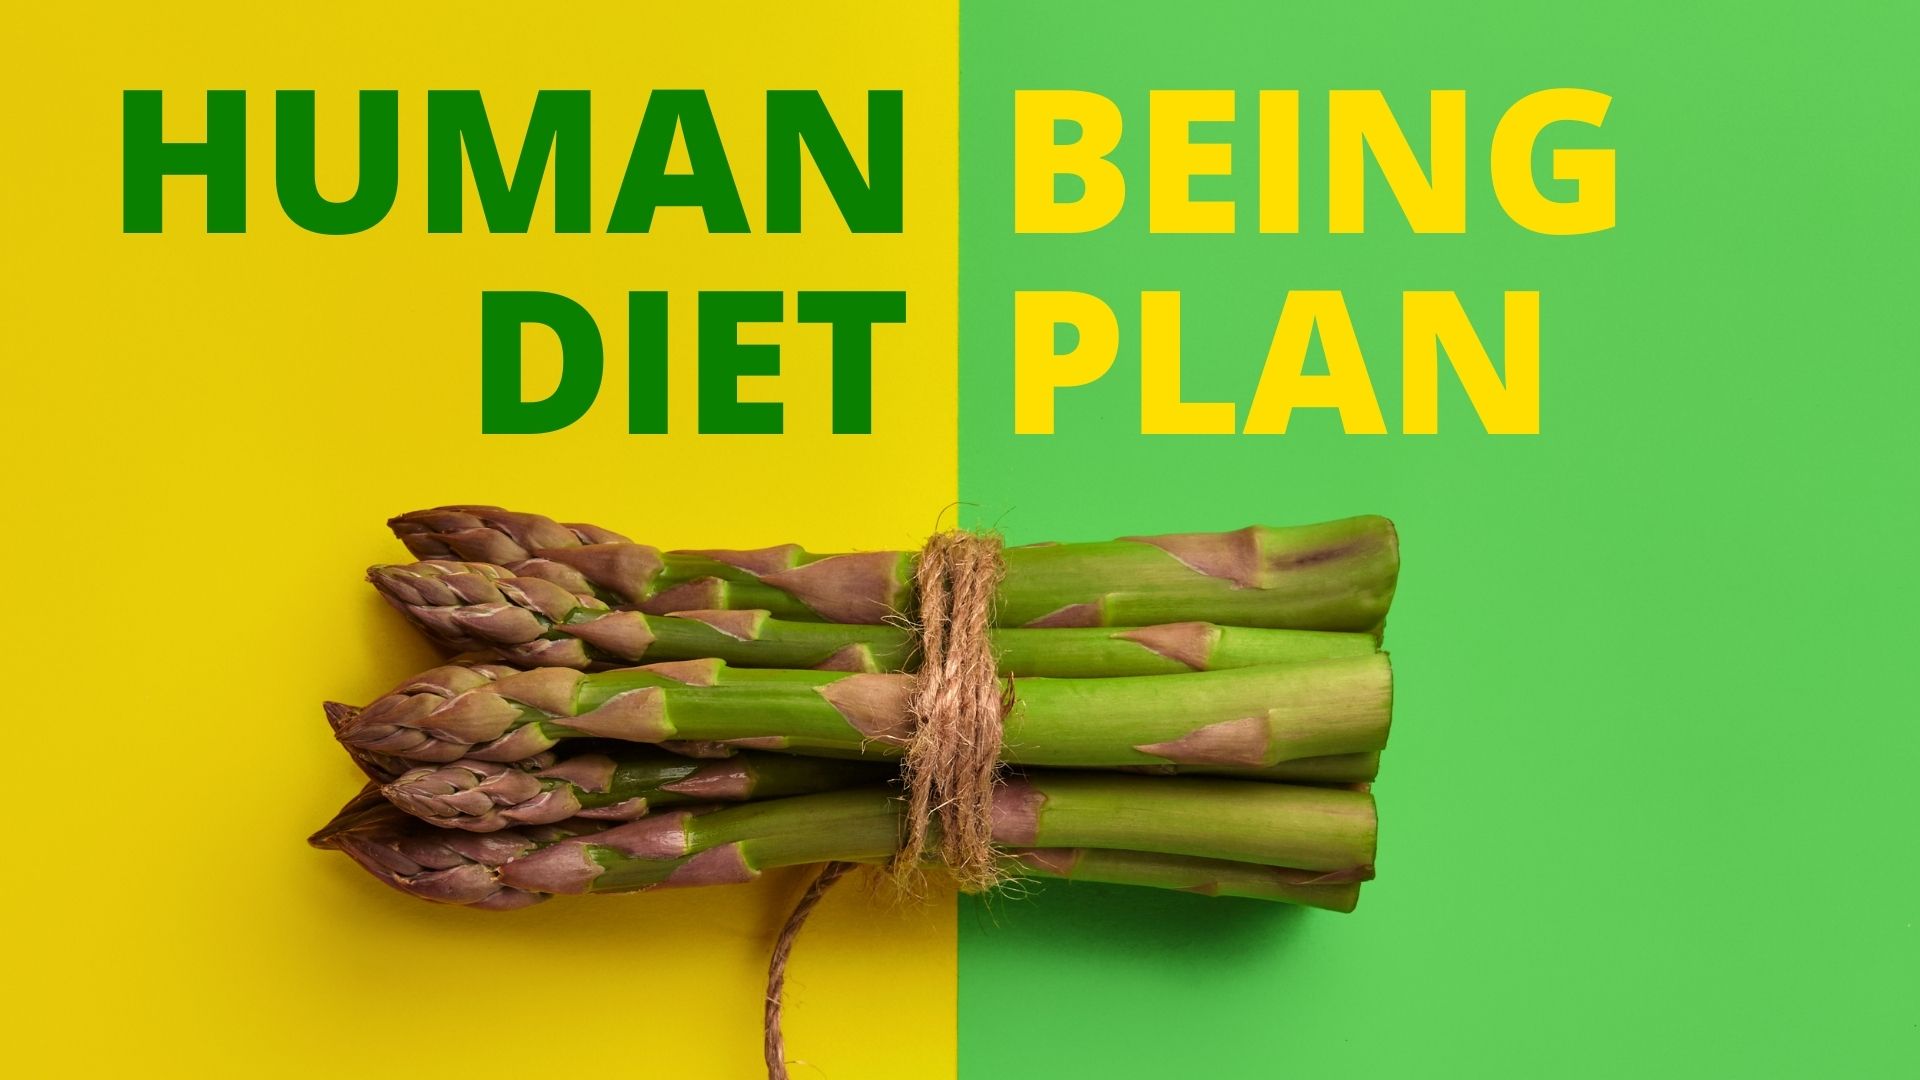 The Human Being Diet